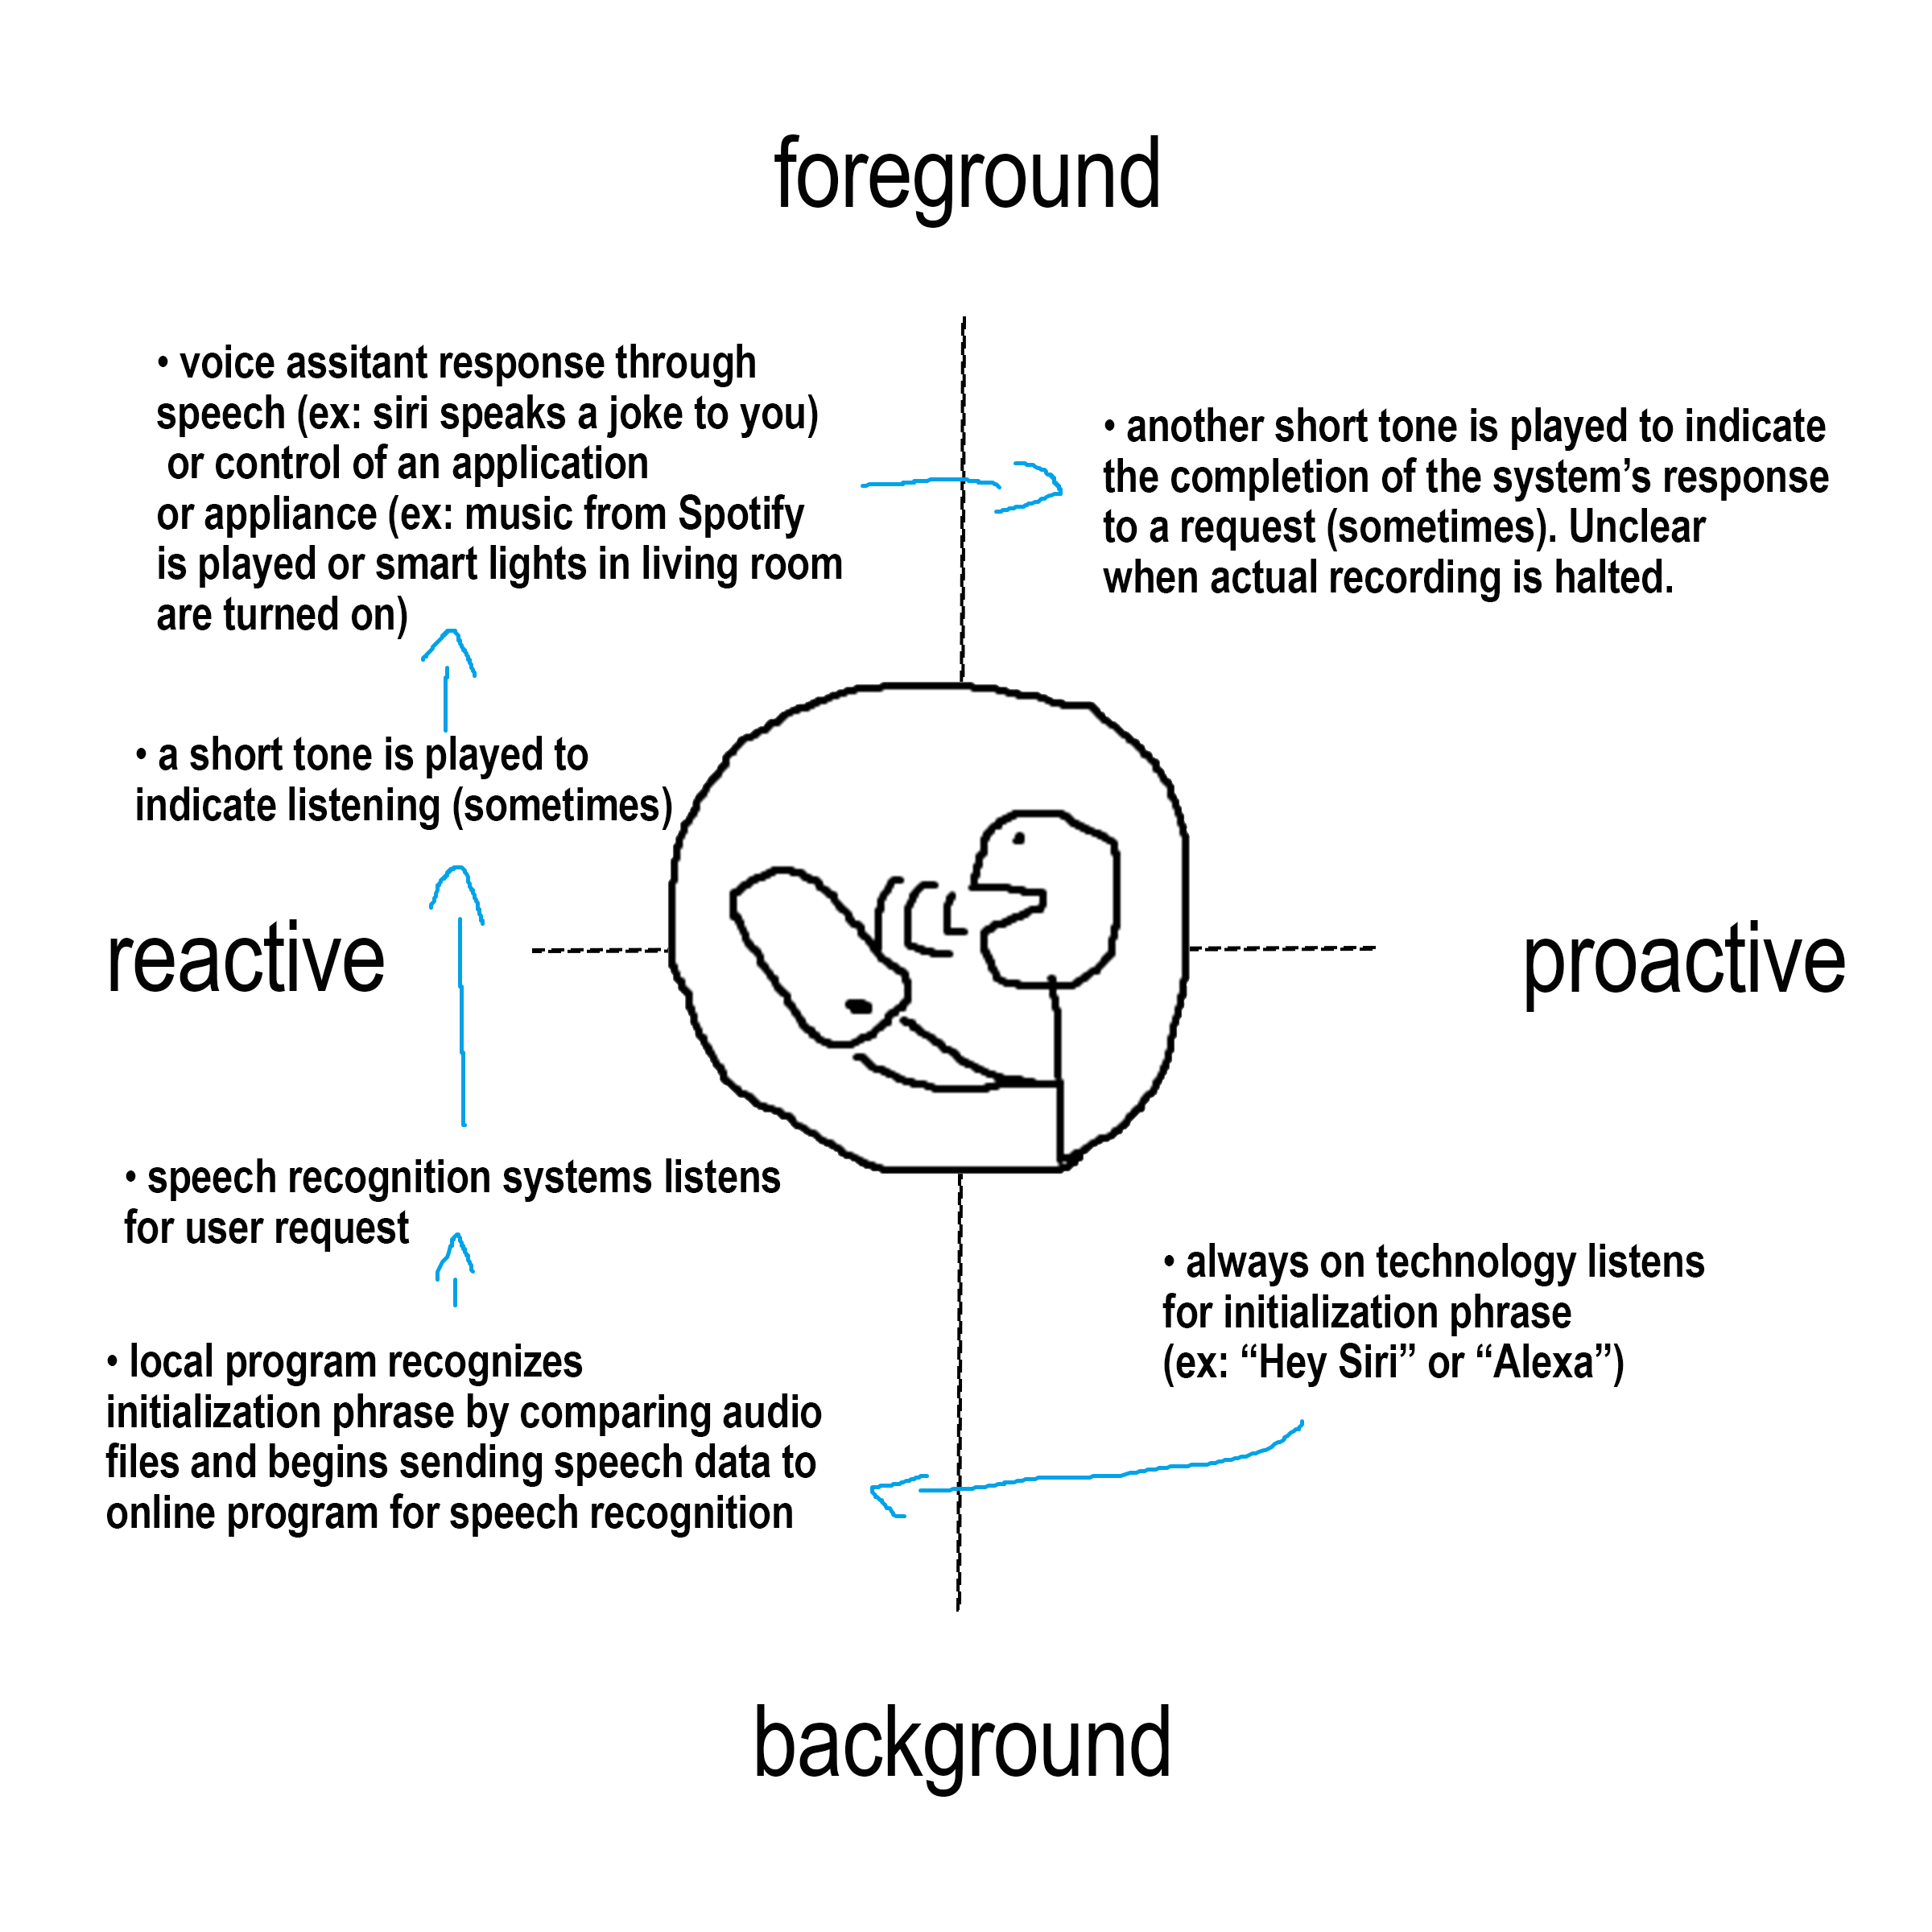 a diagram featuring a stick figure digital icon drawing of a person speaking to a smartphone surrounded by digital text seperated in 4 corners by lines and arrows